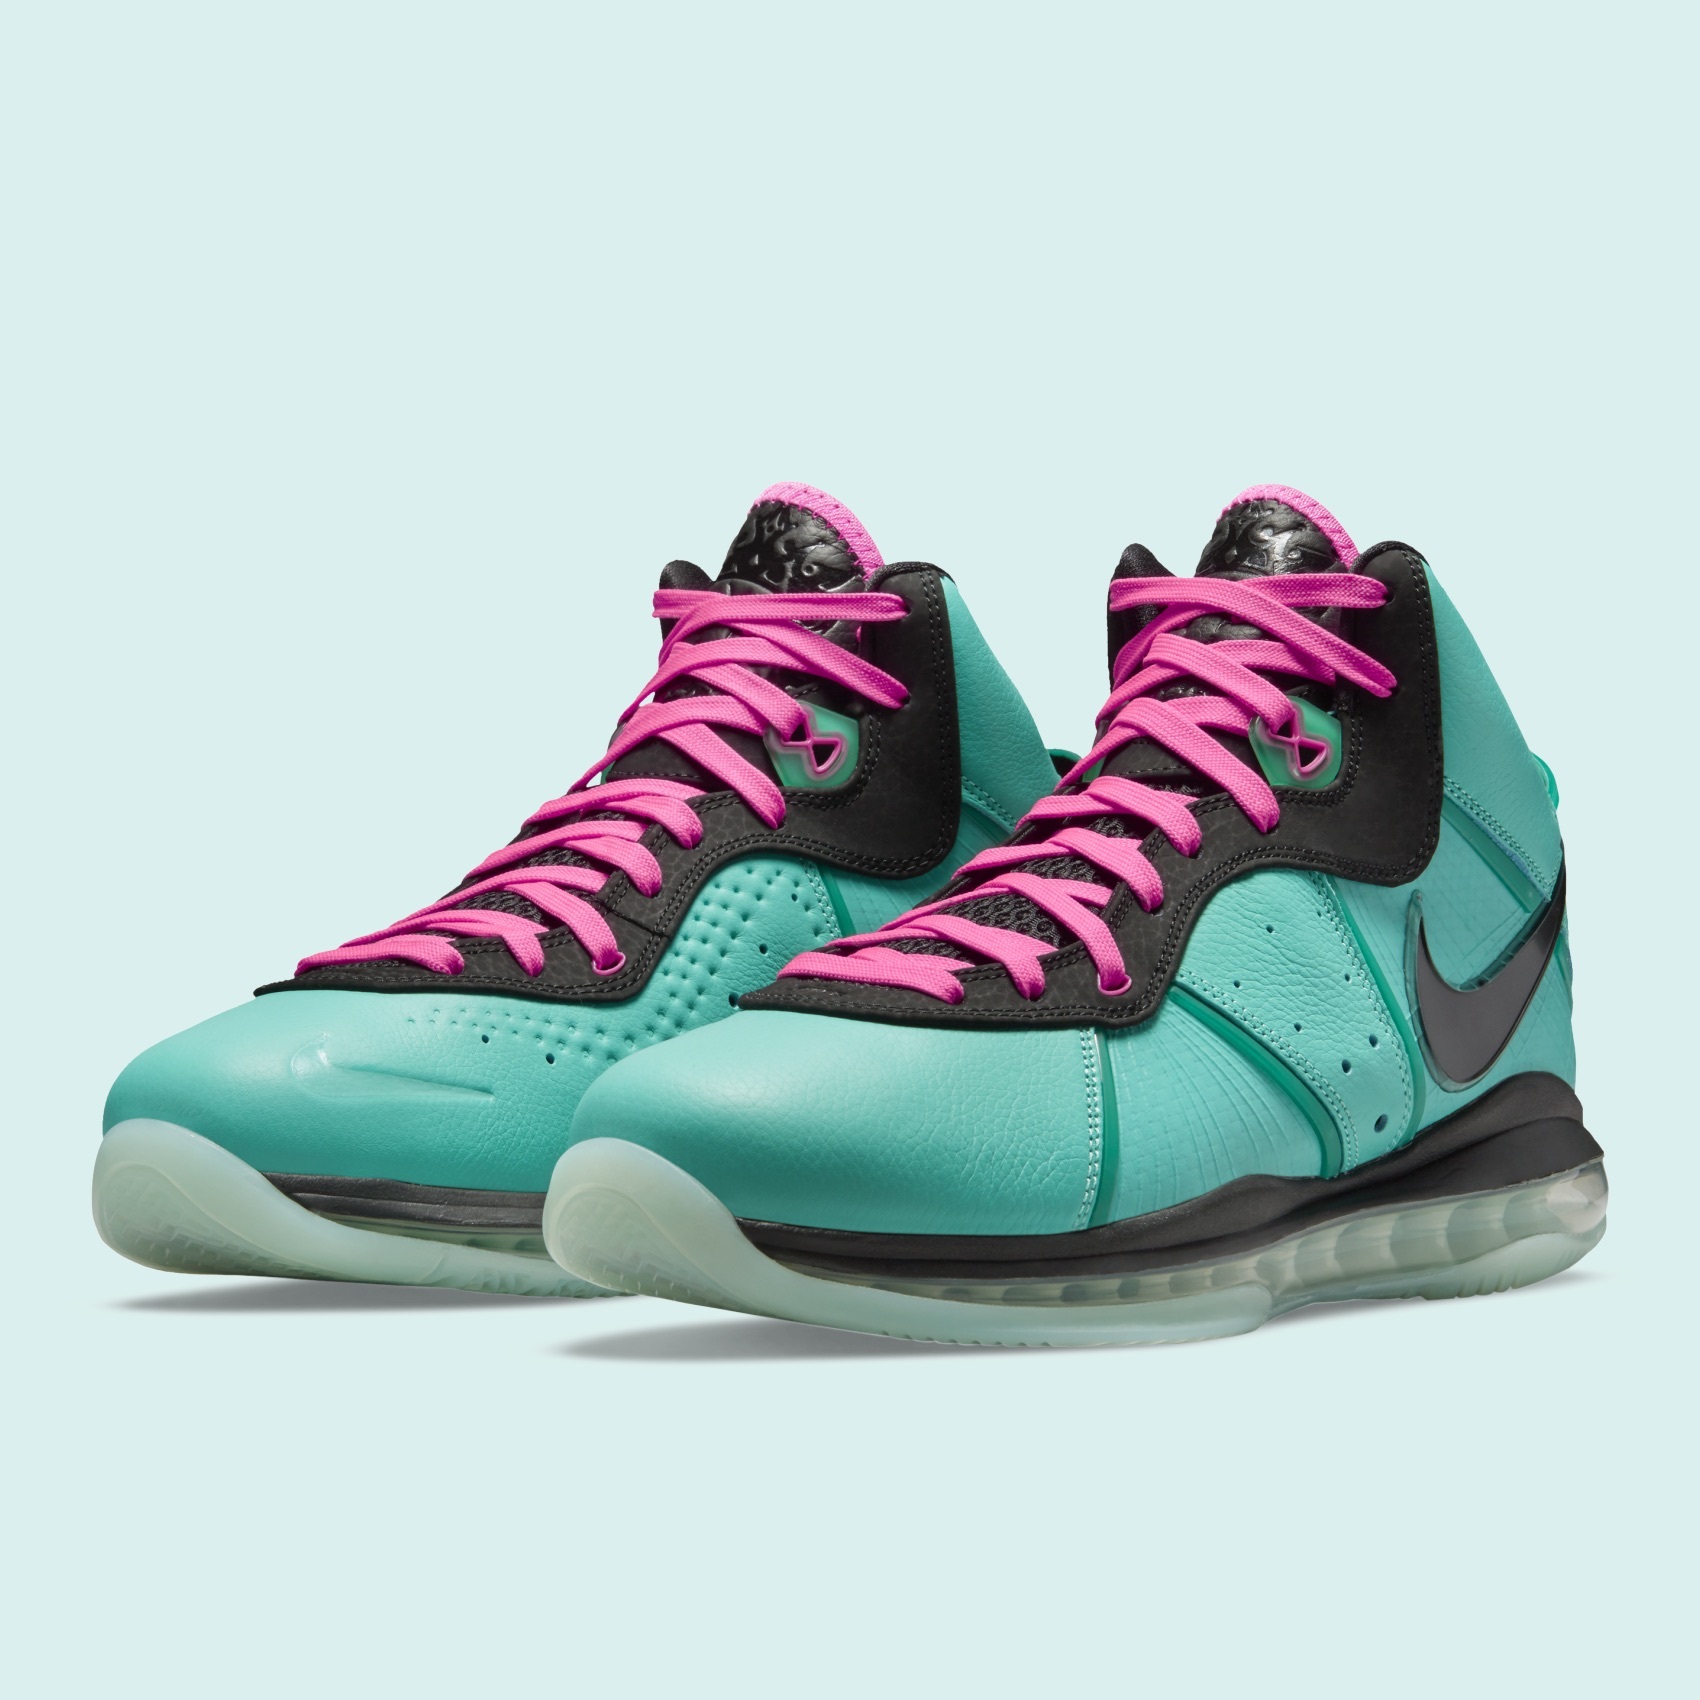 Official Look At The Nike LeBron 8 “South Beach”